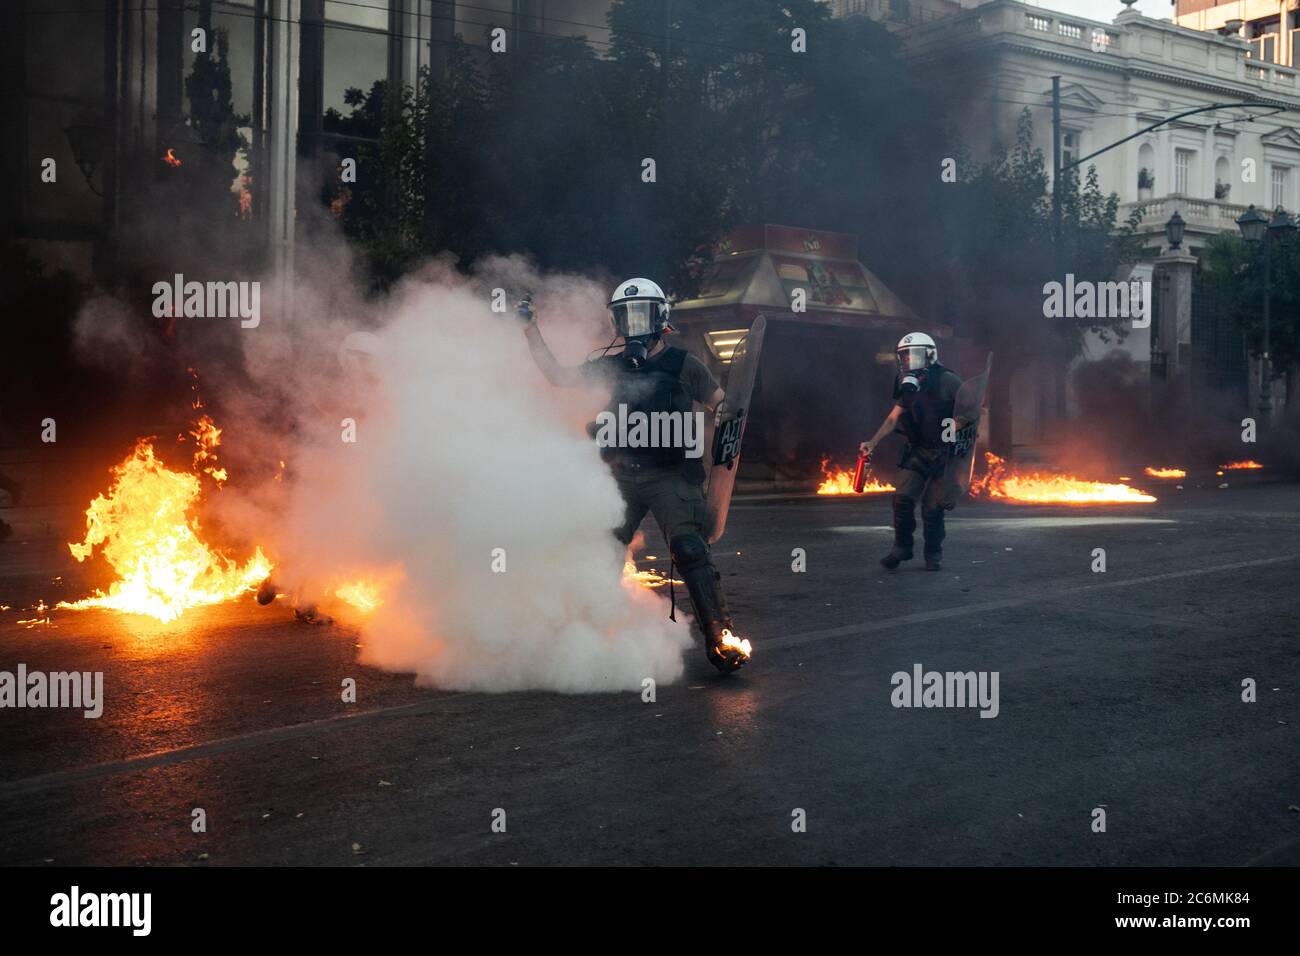 (200711) -- BEIJING, July 11, 2020 (Xinhua) -- Riot police officers respond to petrol bombs with tear gas during protests in Athens, Greece, July 9, 2020. The Greek parliament on Thursday passed a bill regulating public protests amid protests staged by opposition parties and labor unions.   Some 10,000 protesters marched in the center of the capital Athens on Thursday in three separate demonstrations organized by the radical left SYRIZA party, the umbrella union of civil servants ADEDY and the Greek Communist party KKE-affiliated PAME labor union. (Photo by Lefteris Partsalis/Xinhua) Stock Photo